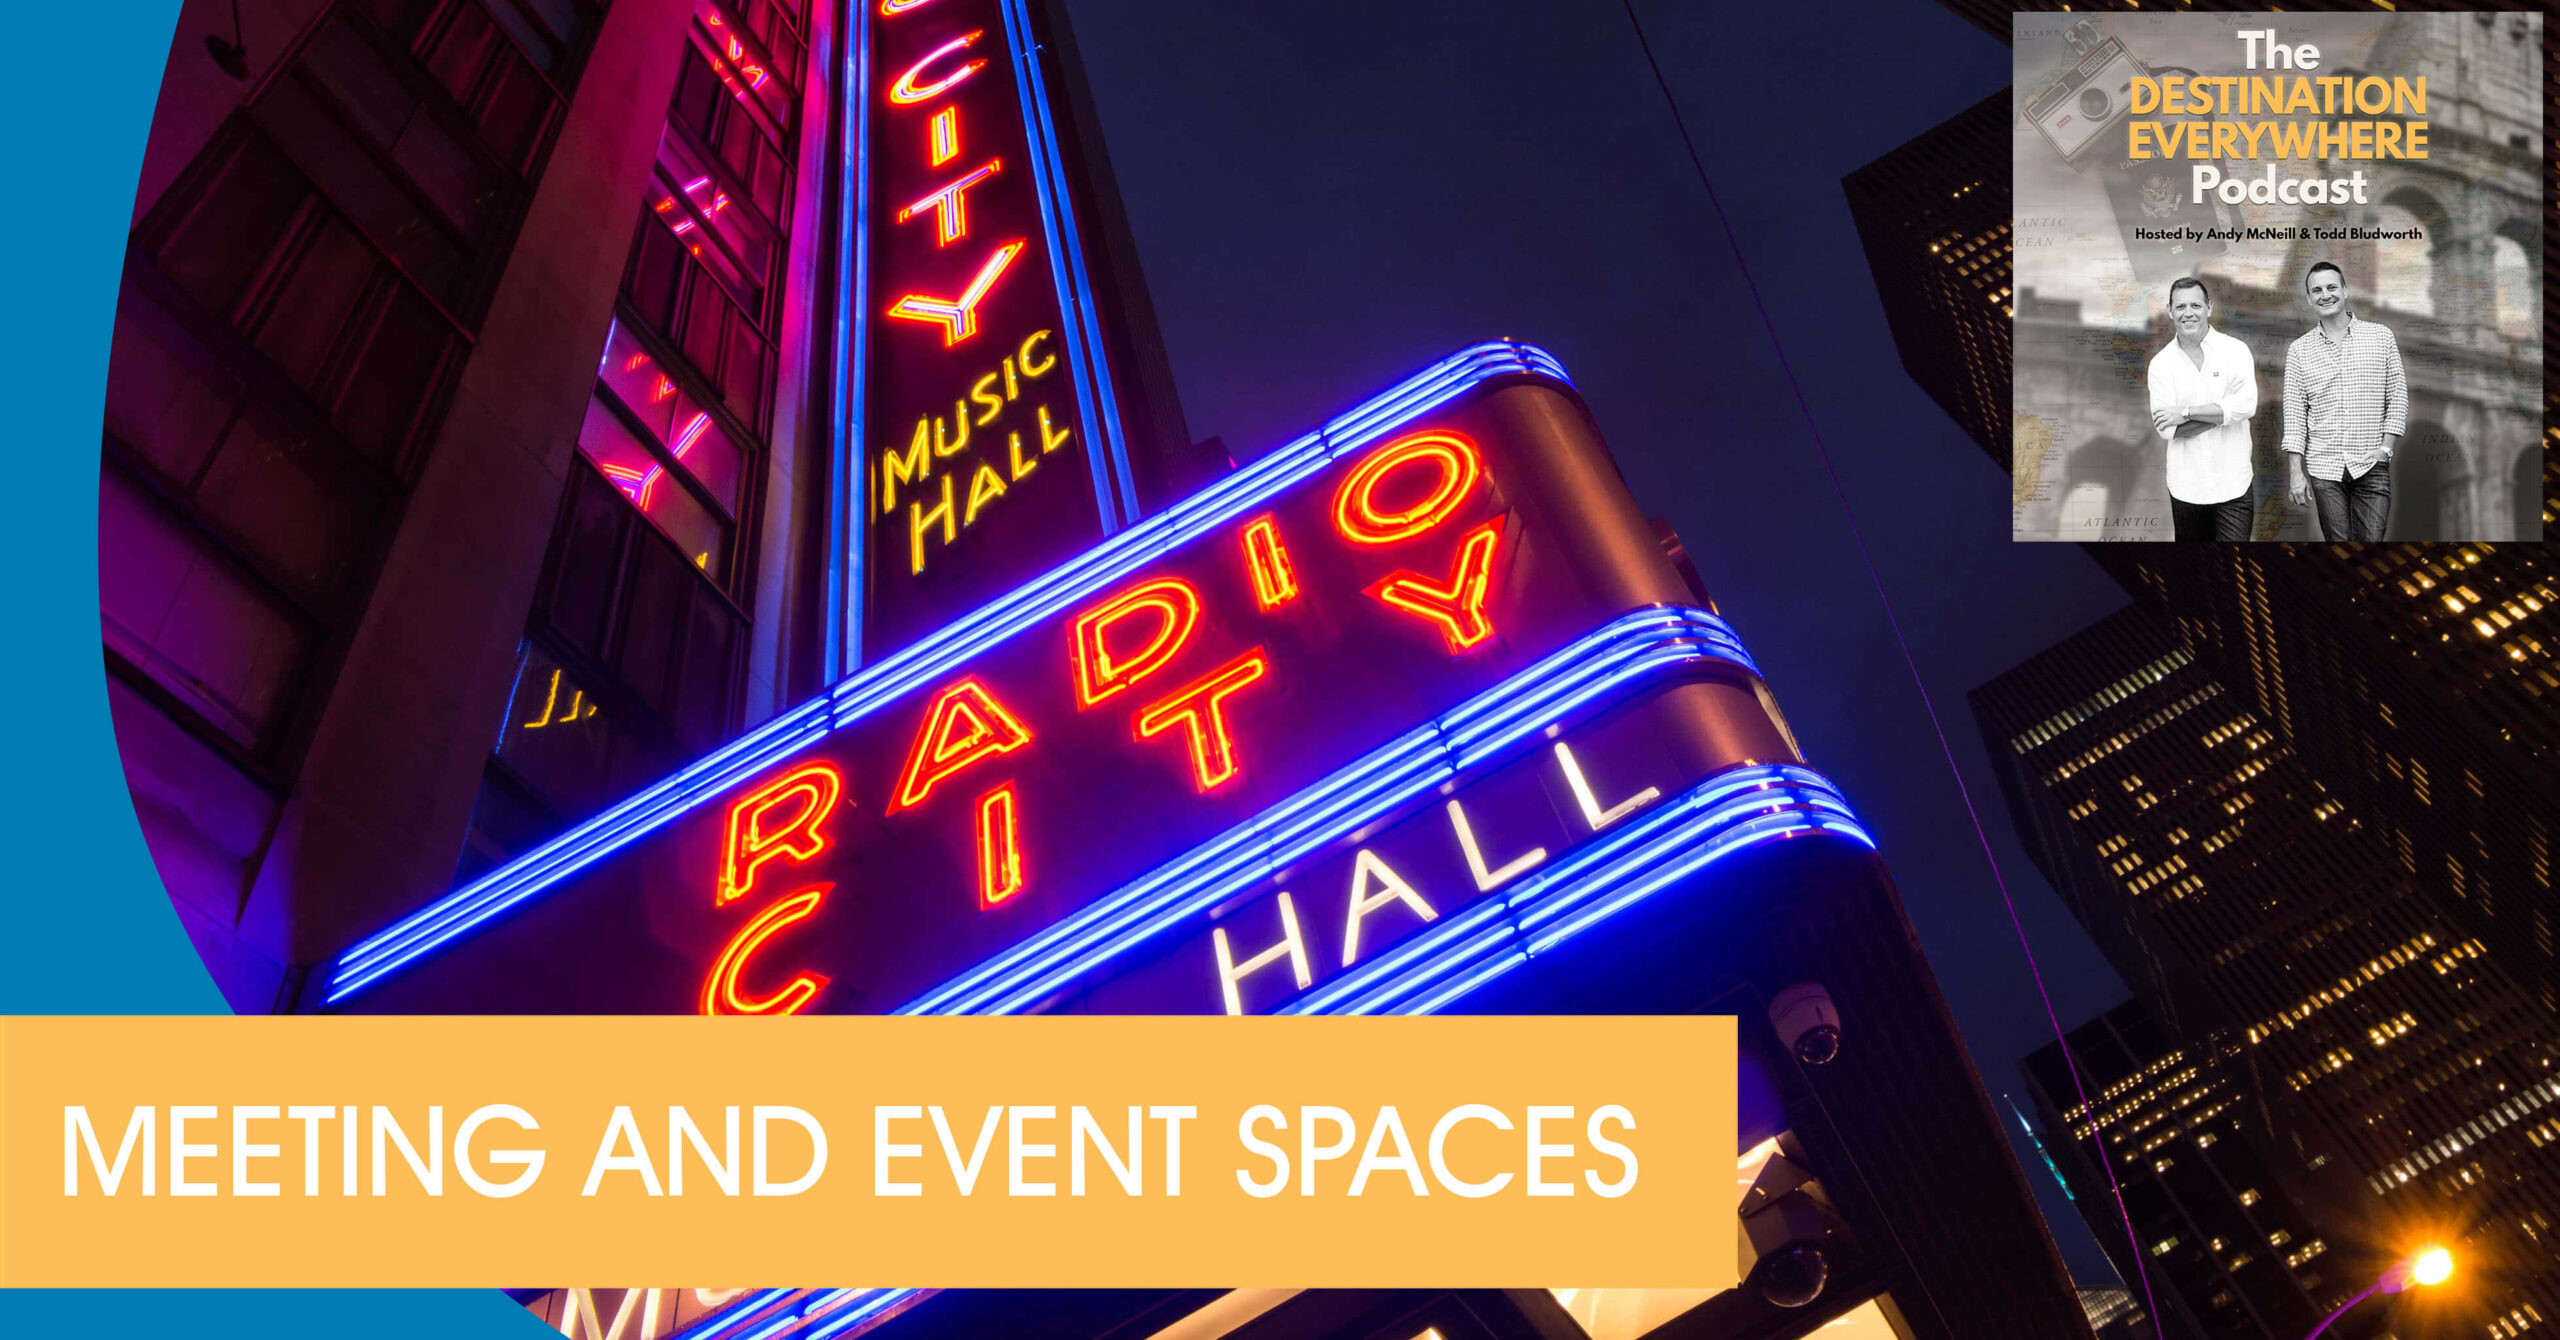 The Coolest Event Spaces In NYC (Spotlight Episode)